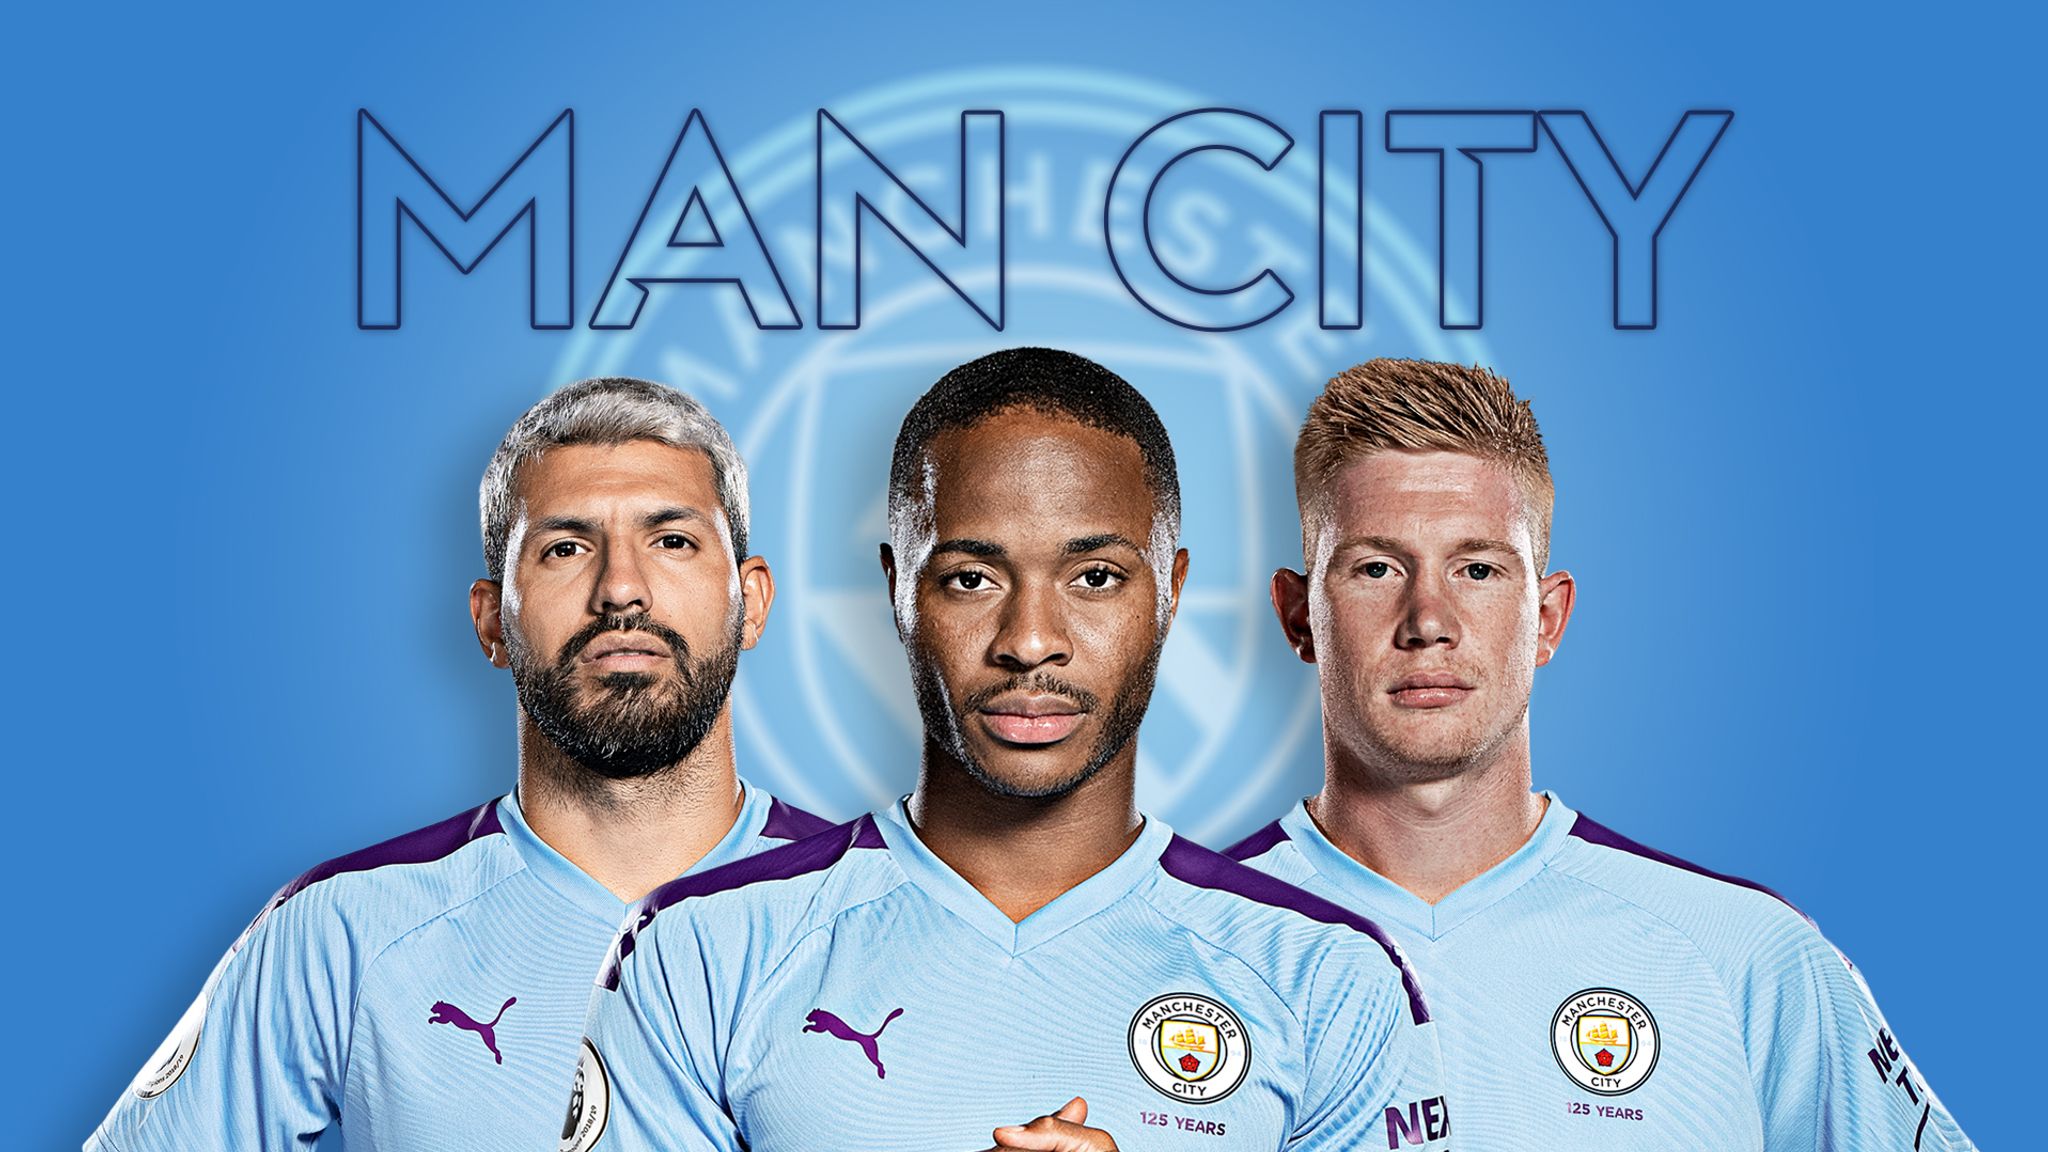 tyrant dialect according to Man City fixtures: Premier League 2020/21 | Football News | Sky Sports